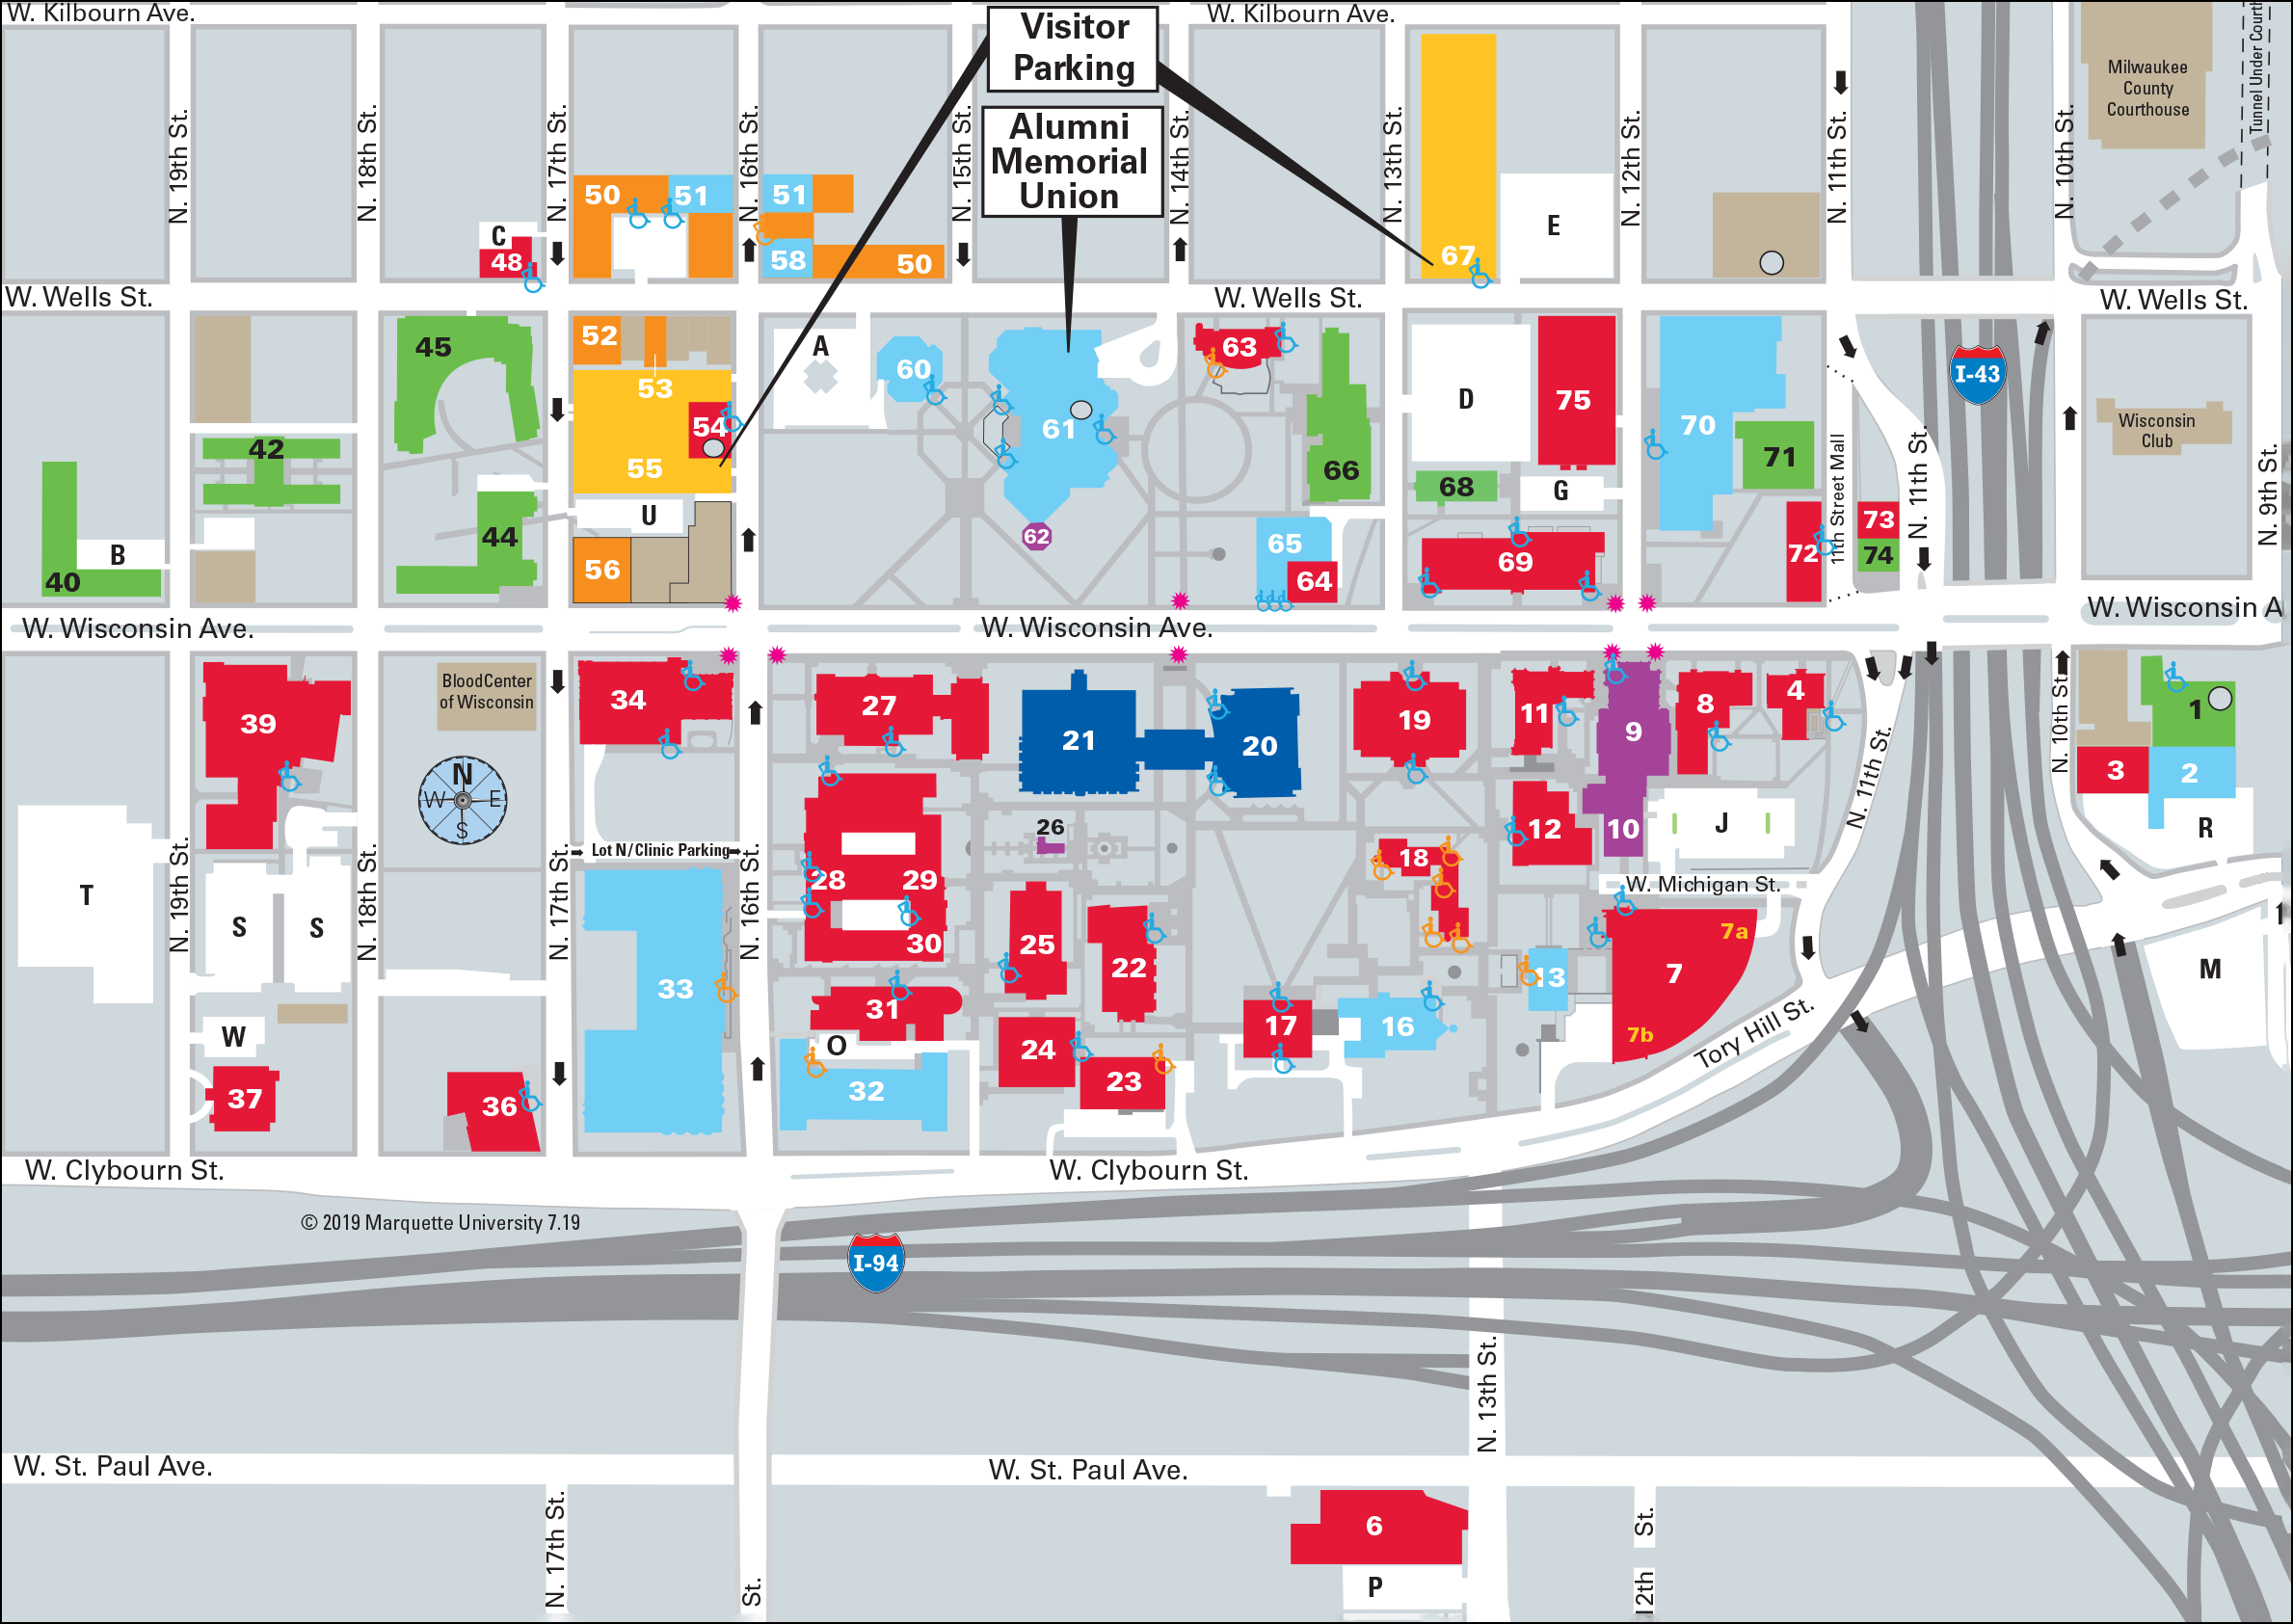 Campus map of parking lots